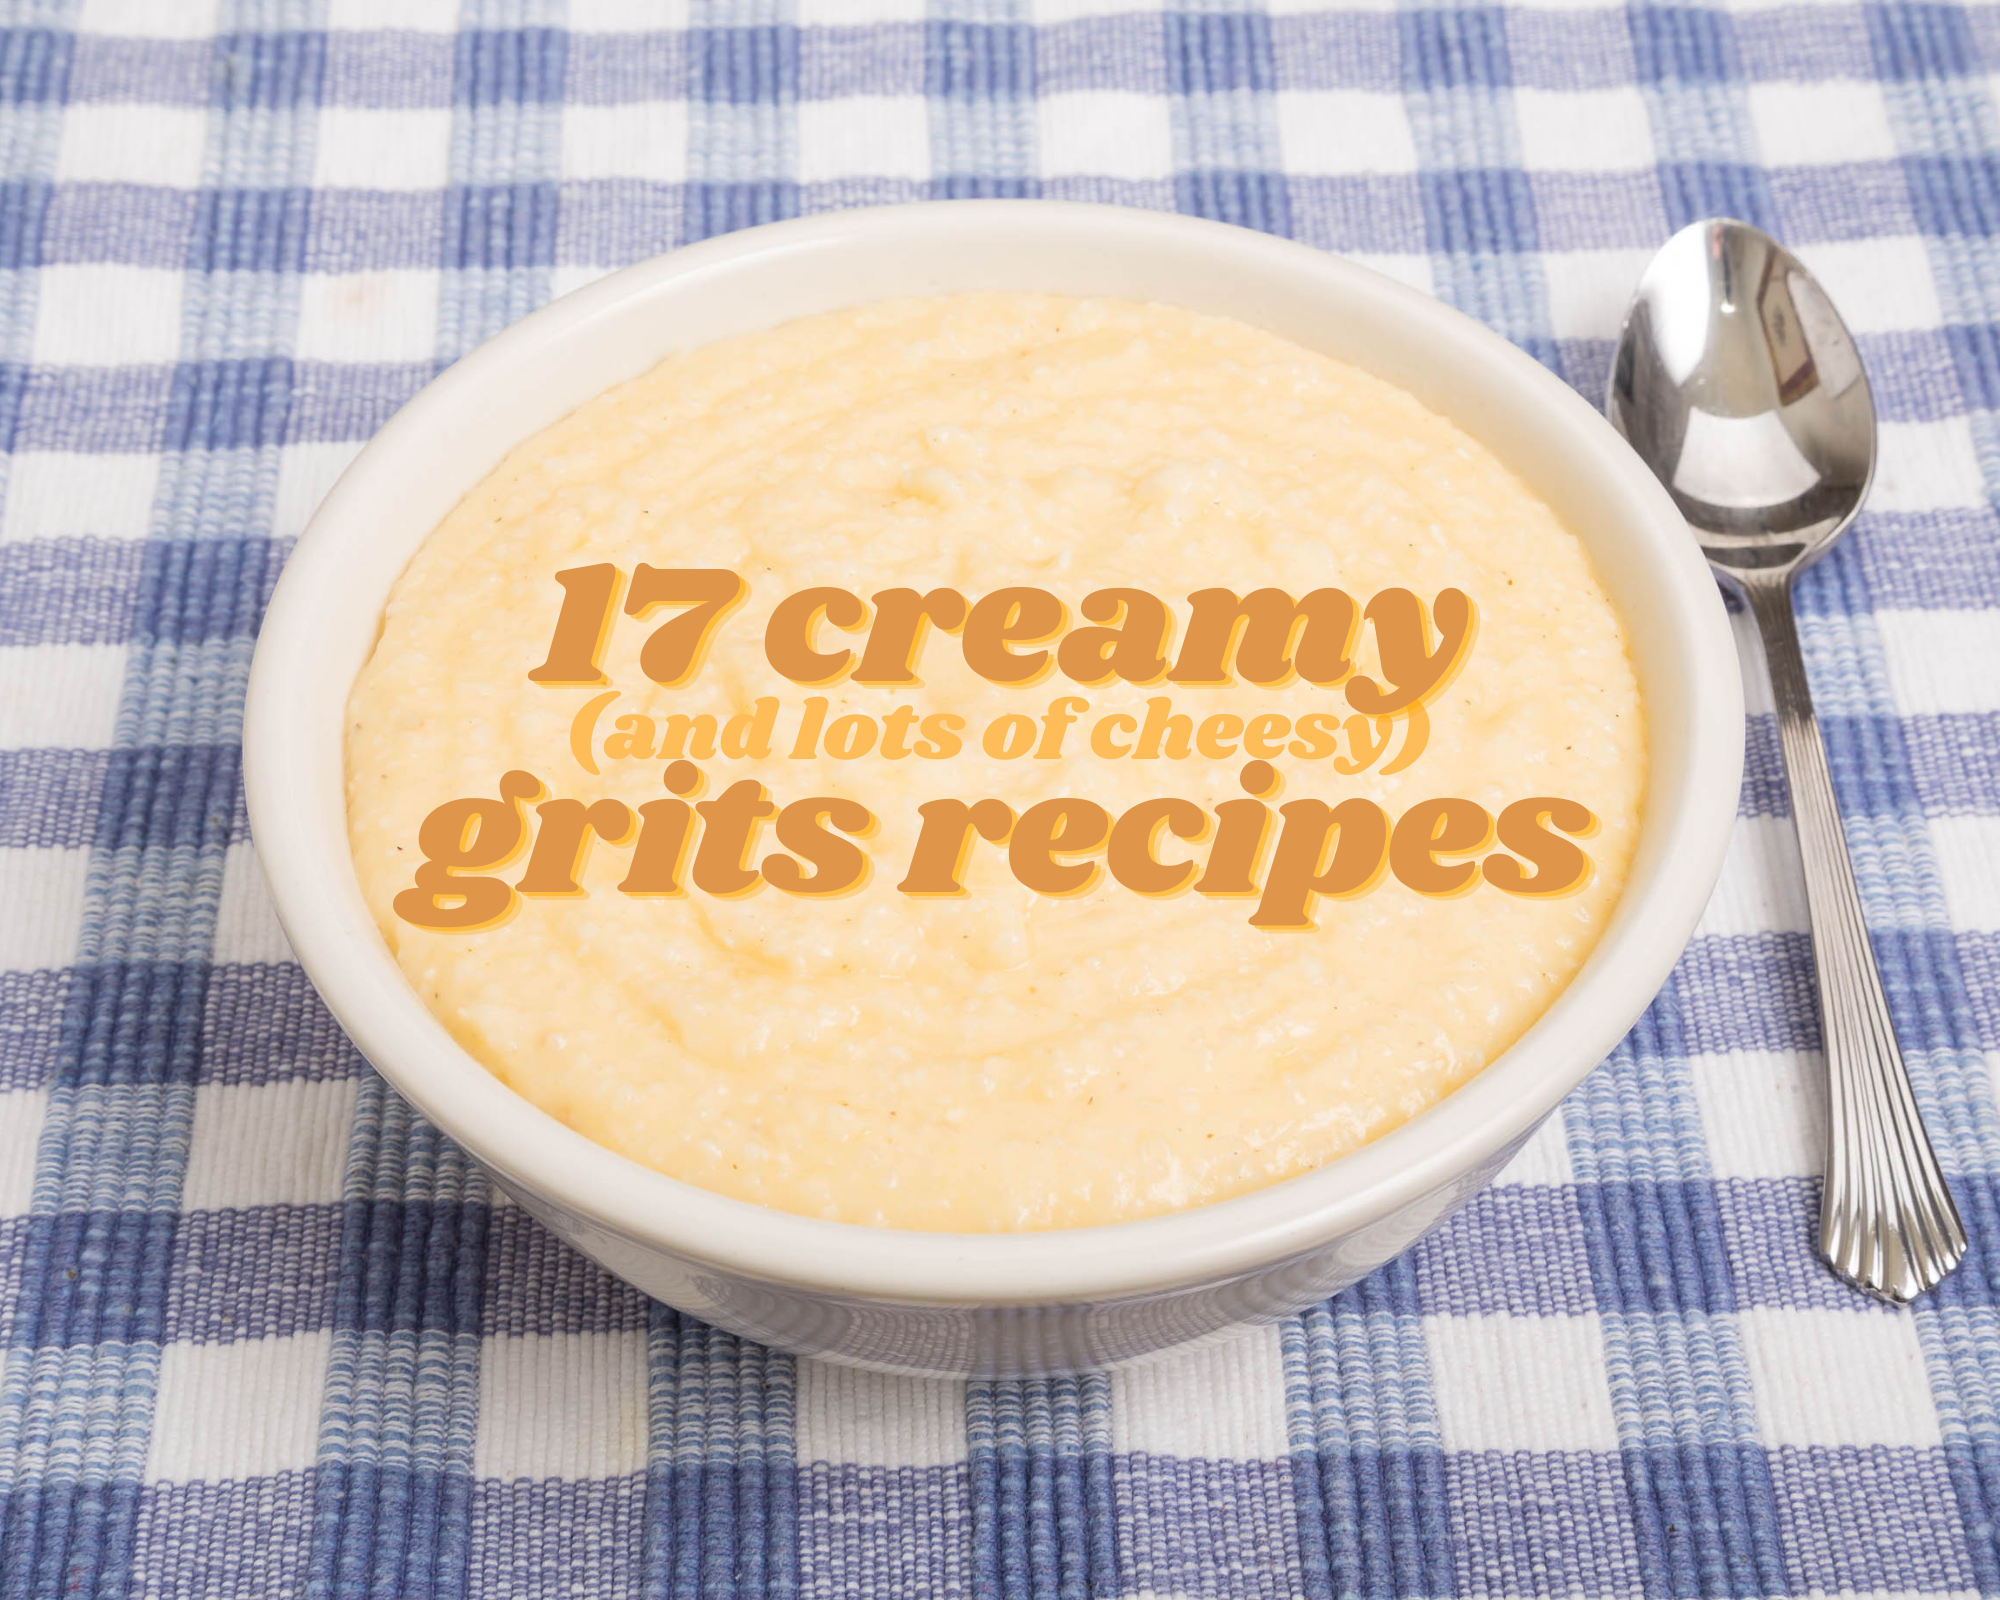 bowl of creamy grits